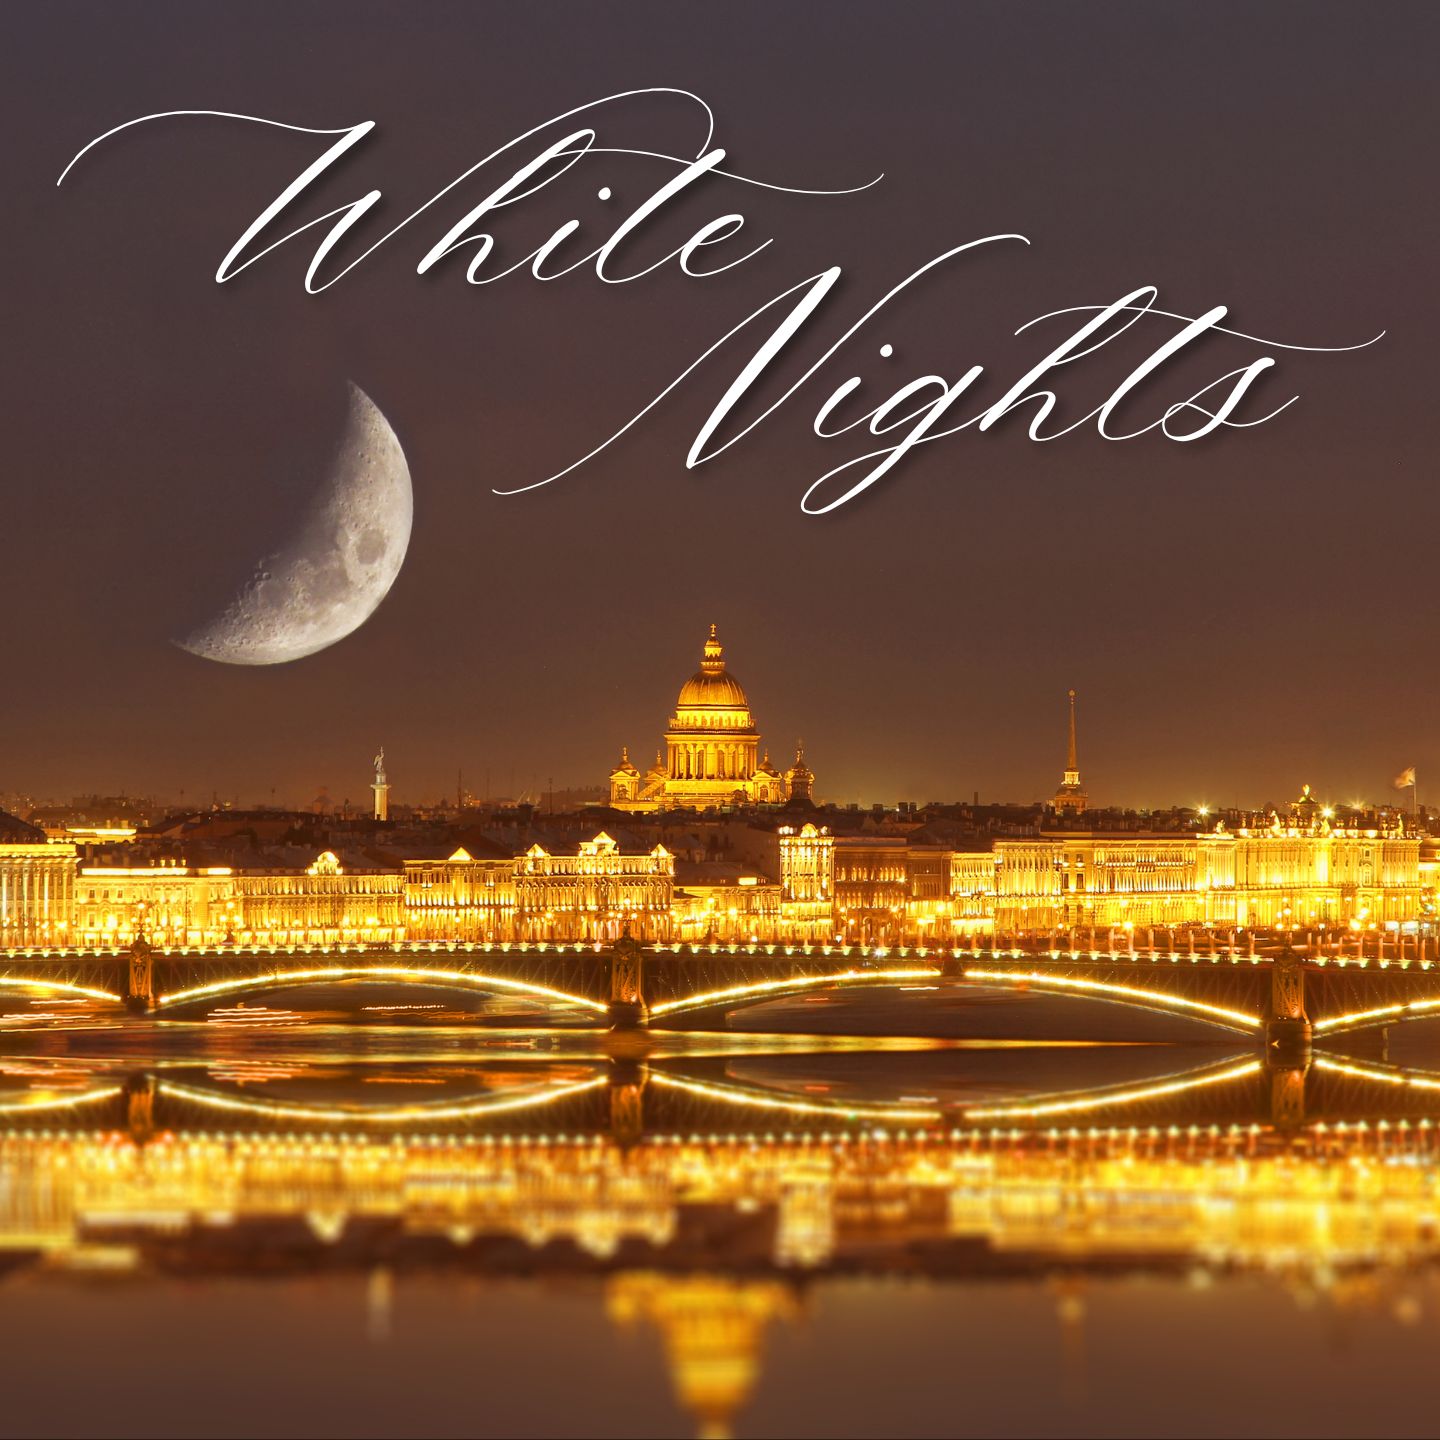 White Nights | A Classical Music Playlist inspired by the Novel